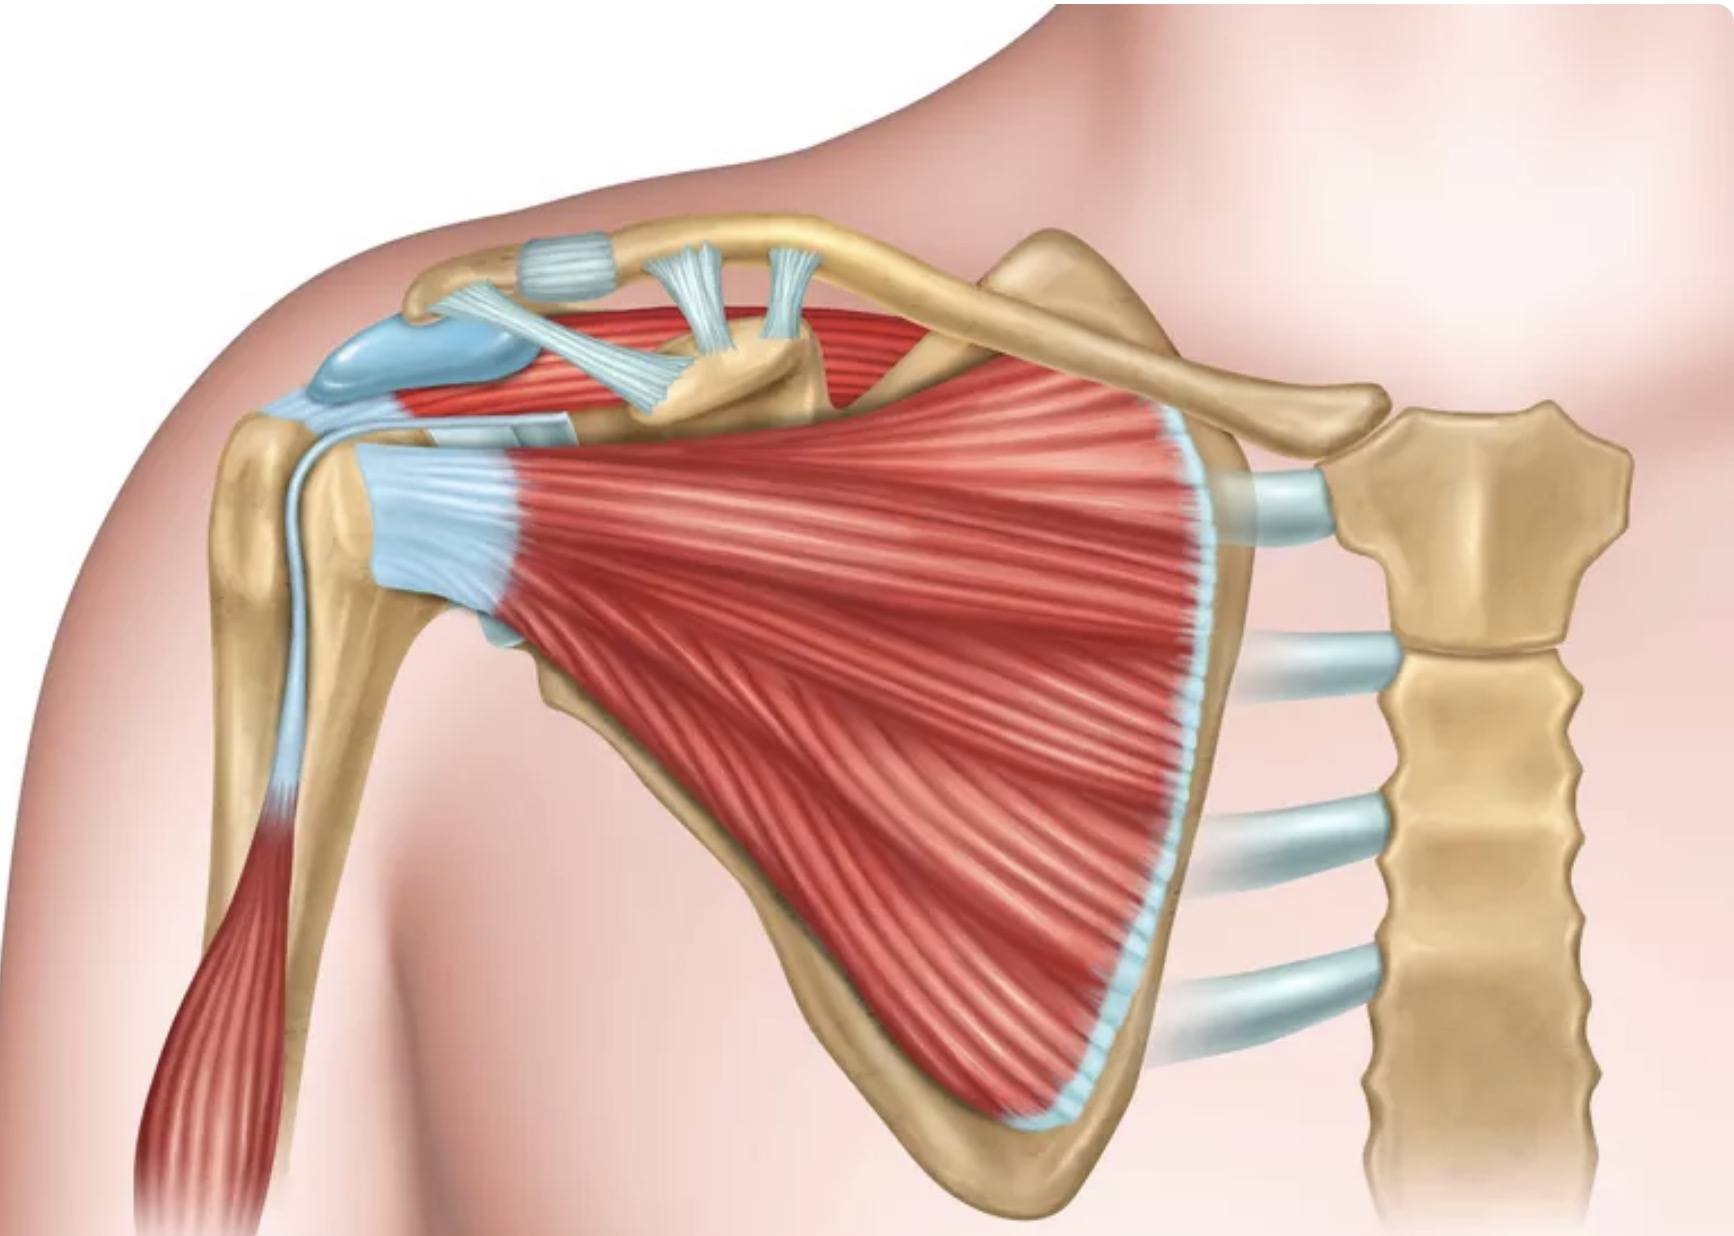 3 Exercises to Fix Rounded Shoulders